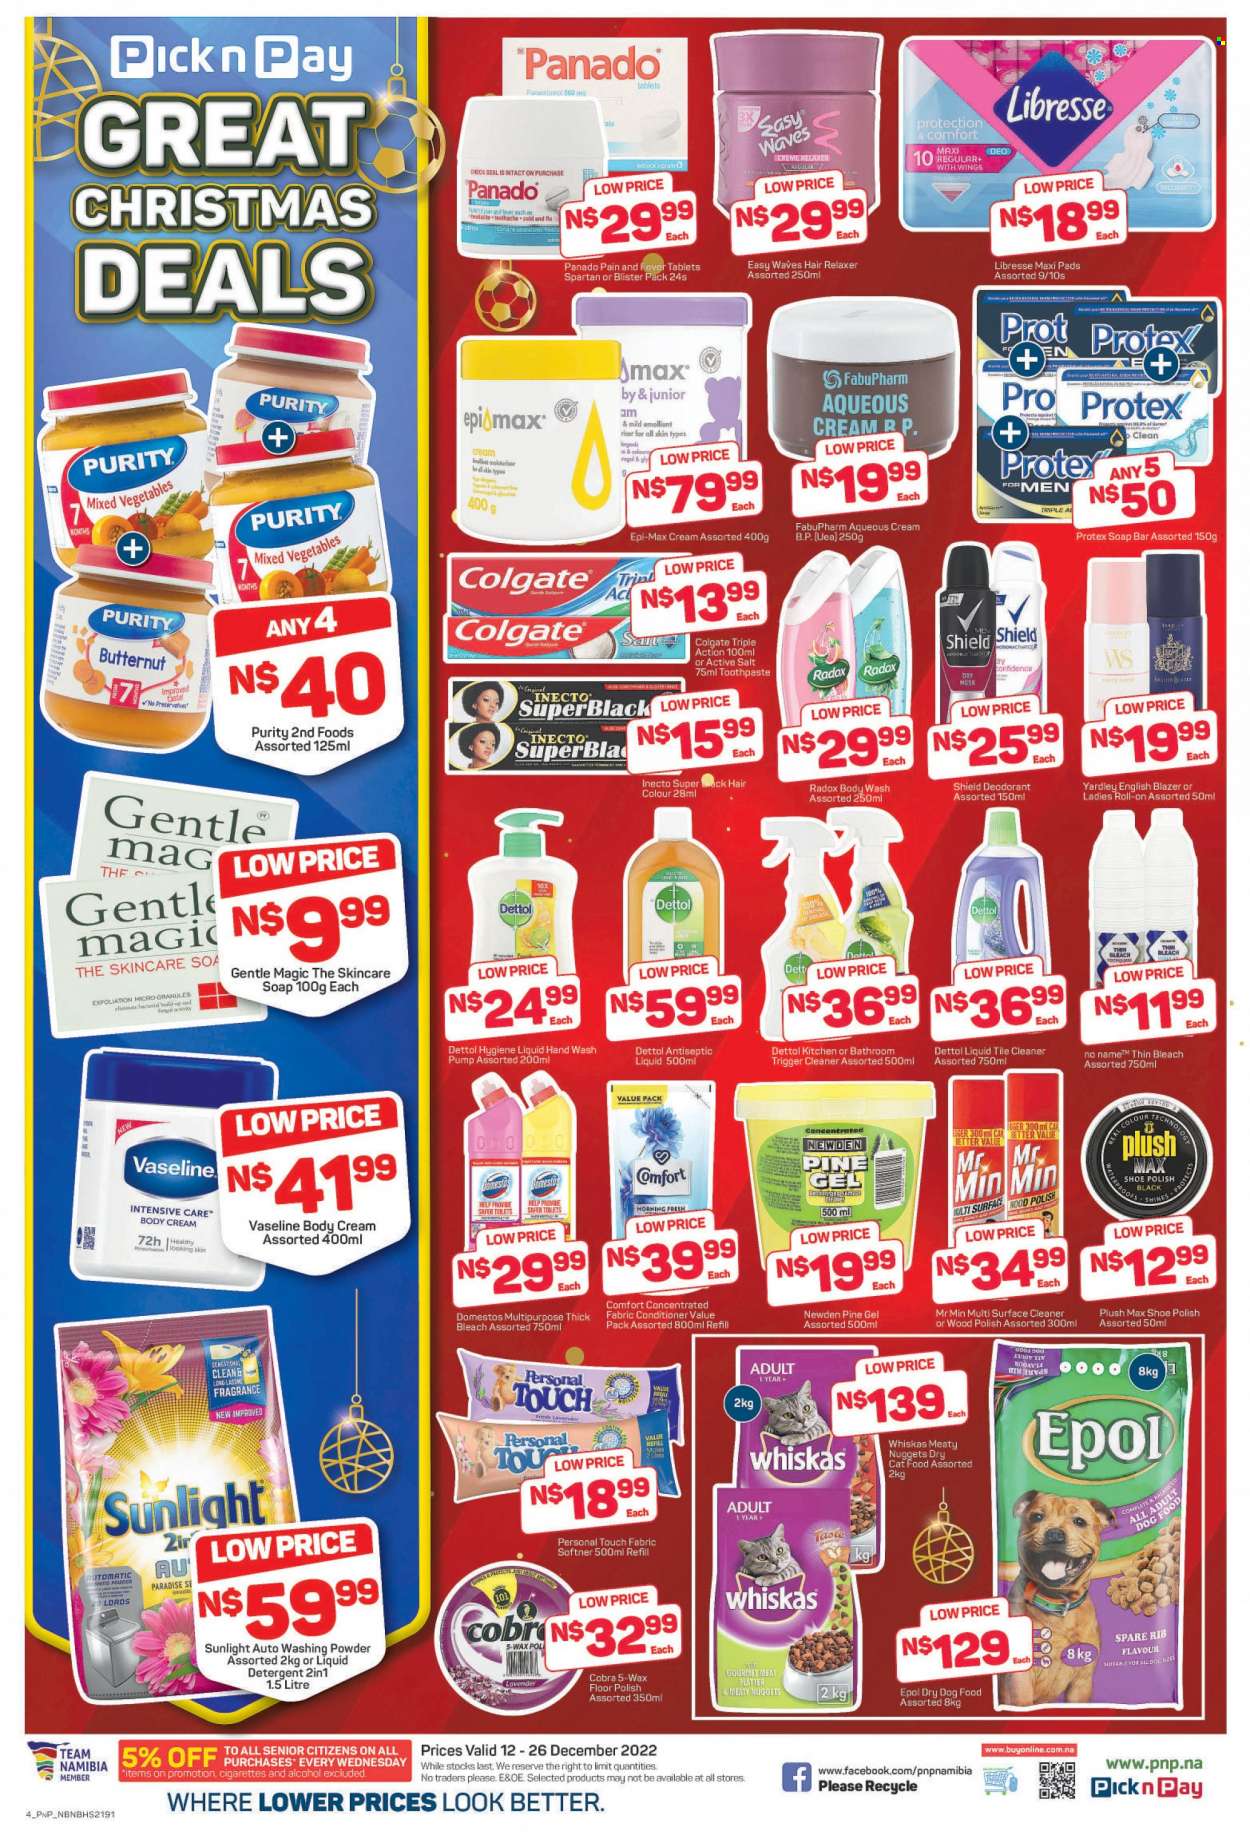 thumbnail - Pick n Pay catalogue  - 12/12/2022 - 26/12/2022 - Sales products - mixed vegetables, alcohol, Purity, detergent, Domestos, Dettol, surface cleaner, bleach, cleaner, thick bleach, liquid detergent, laundry powder, Sunlight, body wash, hand wash, Protex, Radox, Vaseline, soap bar, soap, Colgate, toothpaste, sanitary pads, Epi-Max, Gentle Magic, hair color, relaxer, animal food, cat food, dog food, Whiskas, dry dog food, dry cat food, butternut squash. Page 4.